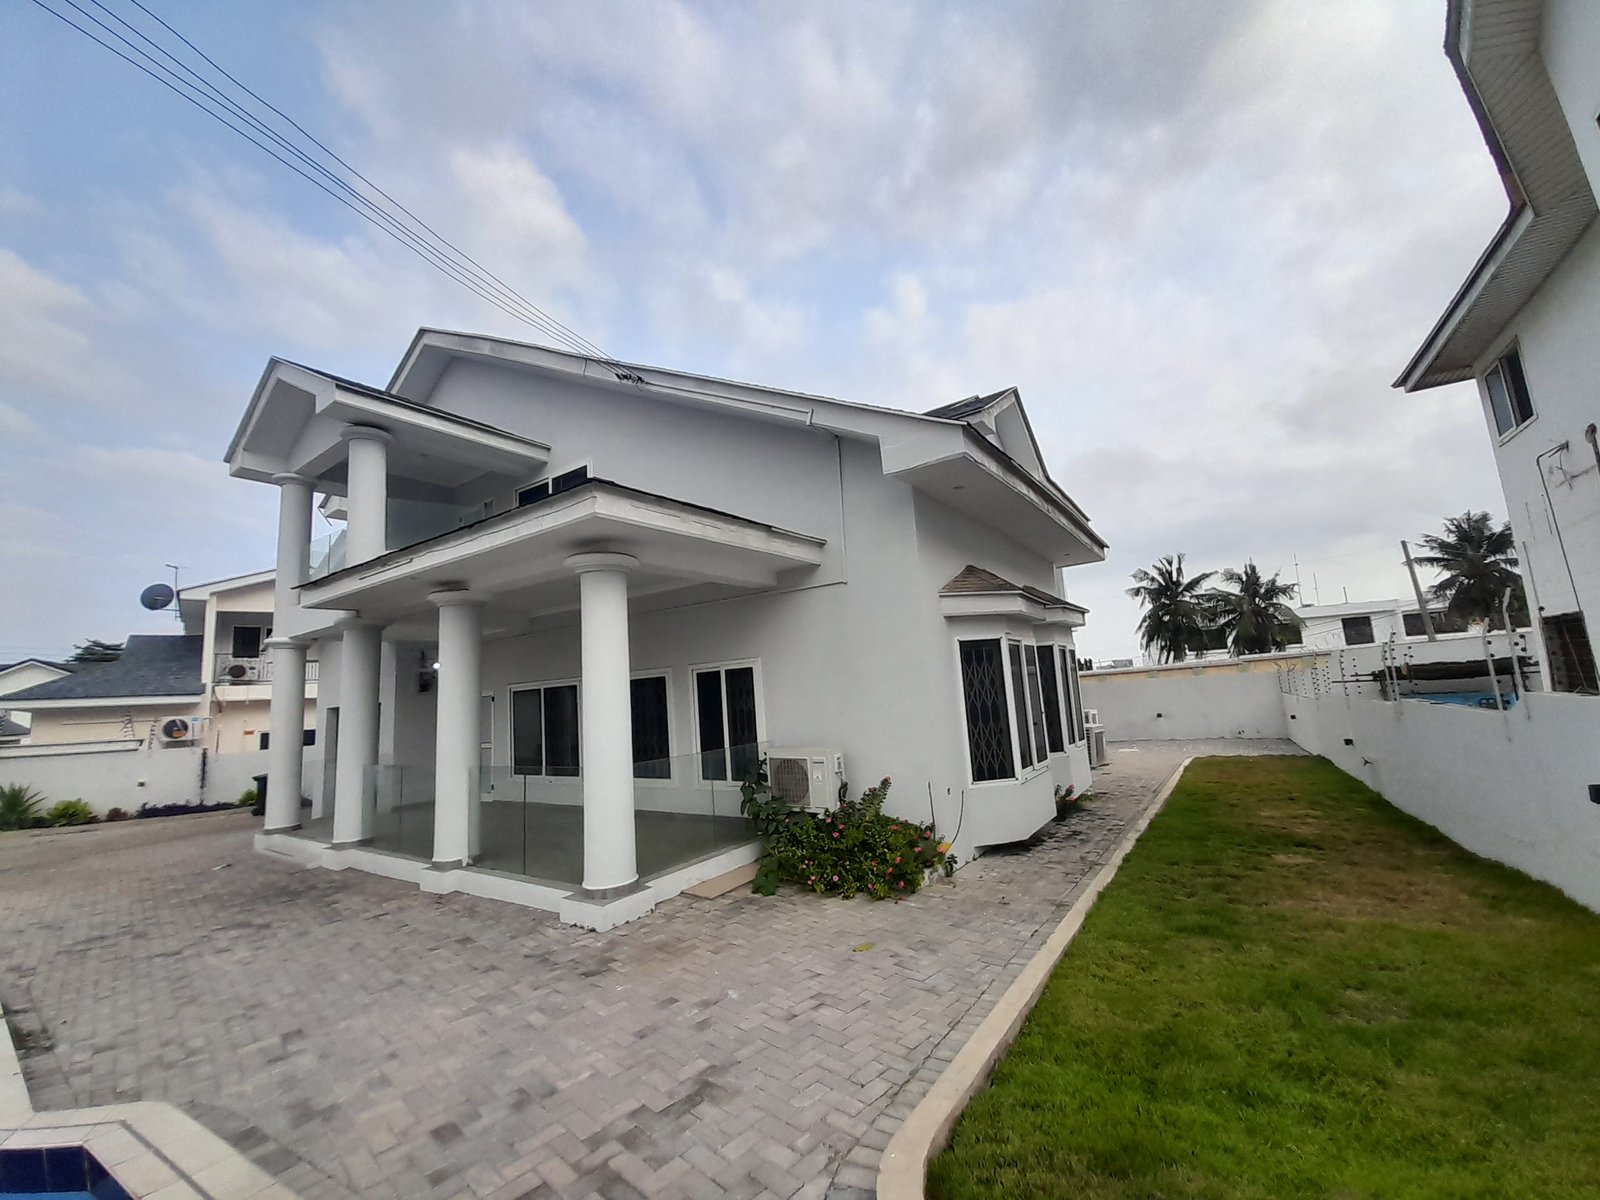 4 Bedroom House For Rent 